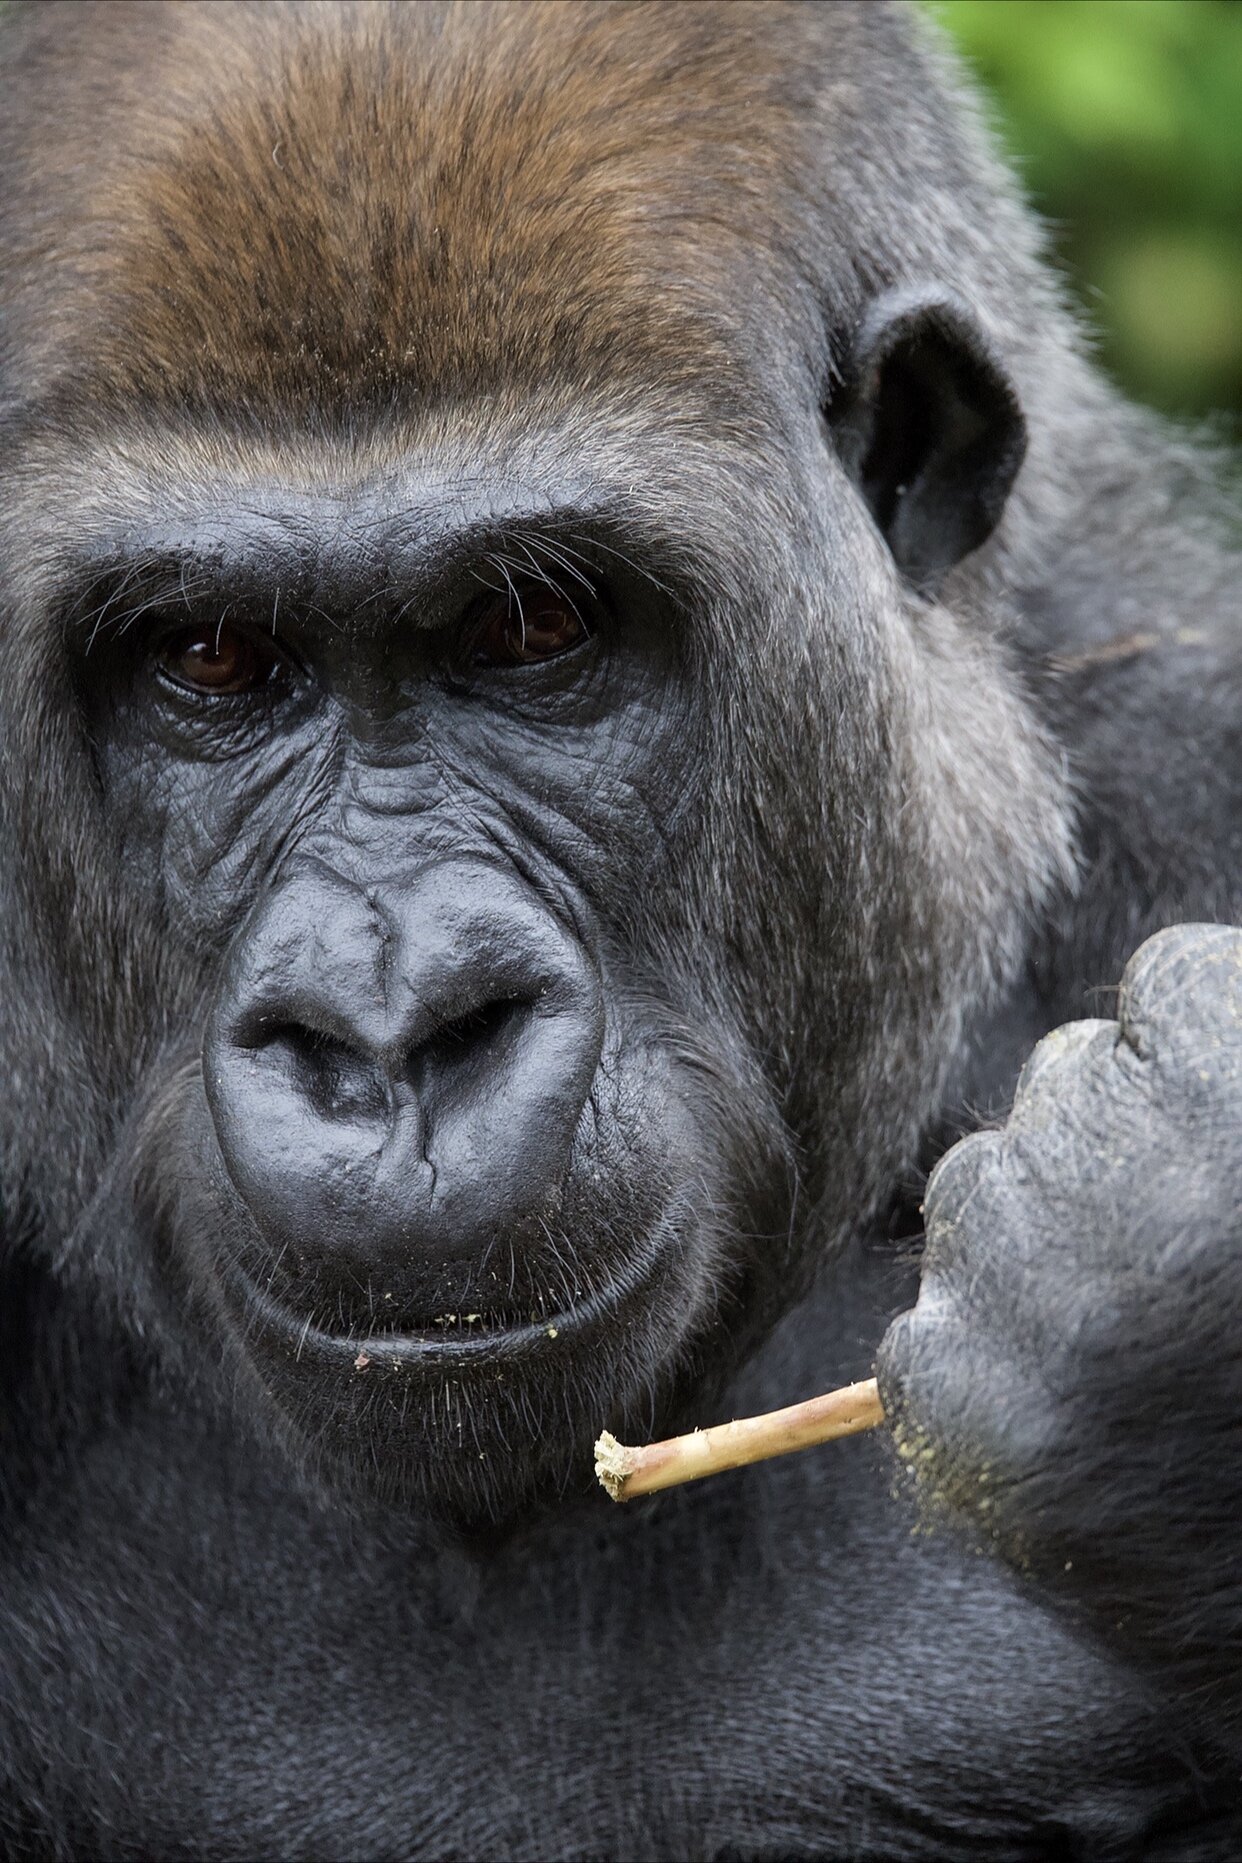  The western lowland gorilla is the most numerous and widespread of all gorilla subspecies.   Populations can be found in Cameroon, the Central African Republic, the Democratic Republic of Congo and Equatorial Guinea, and large areas in Gabon and the